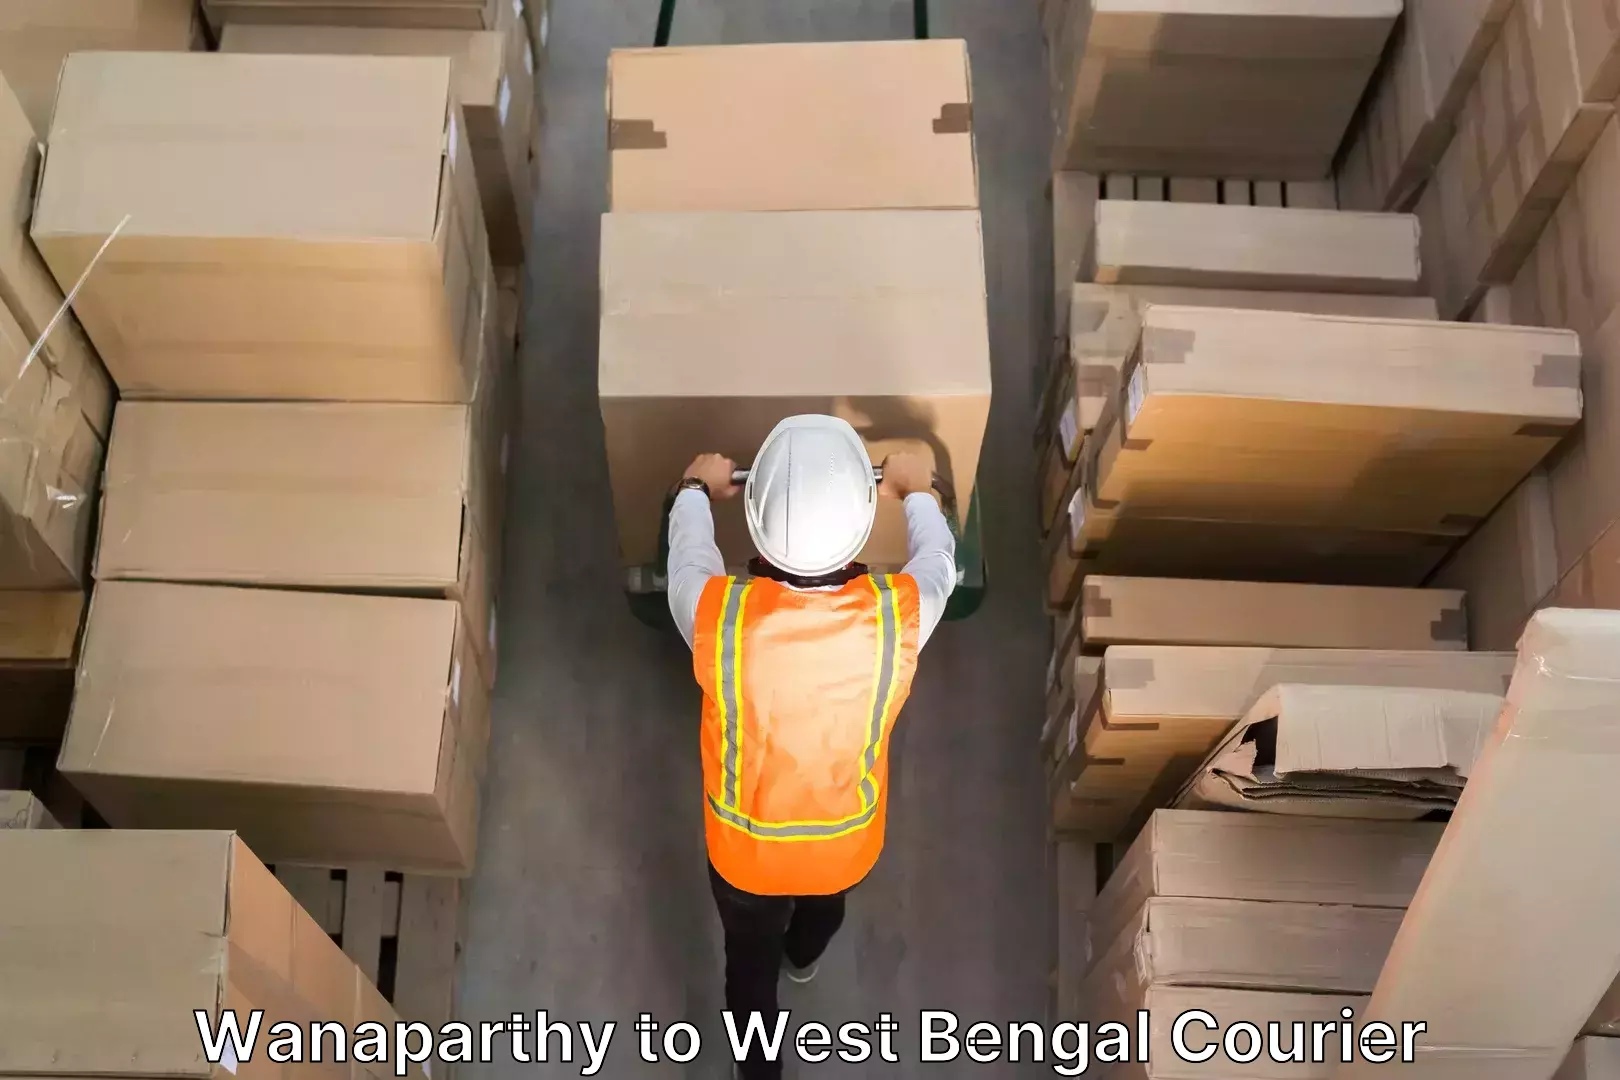 Trusted moving company Wanaparthy to West Bengal